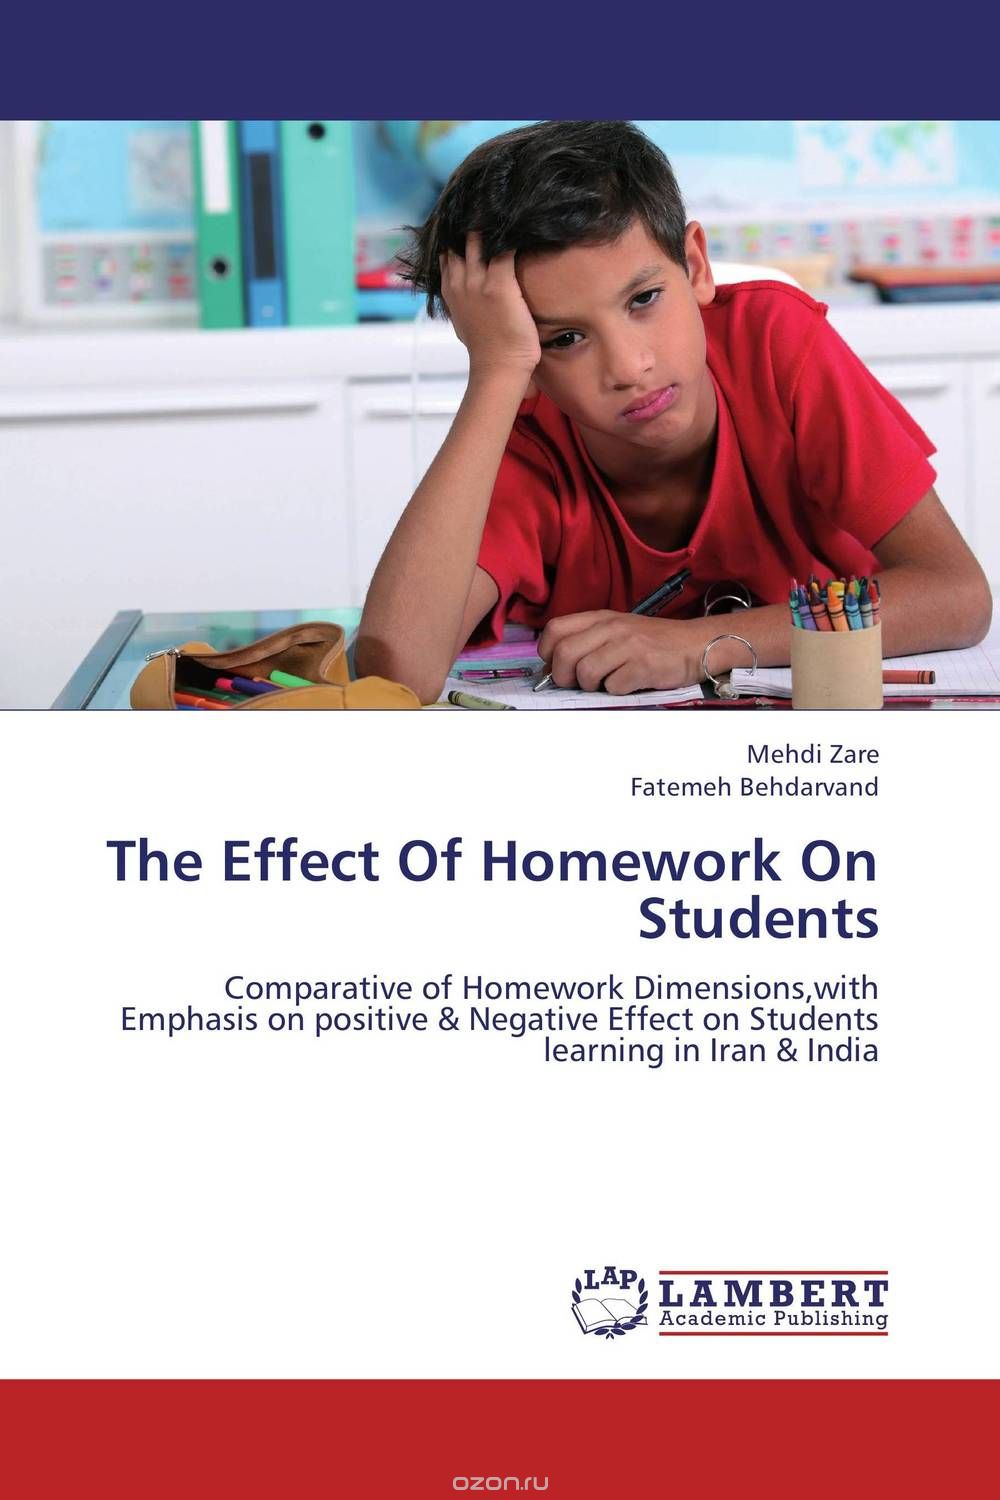 The Effect Of Homework On Students